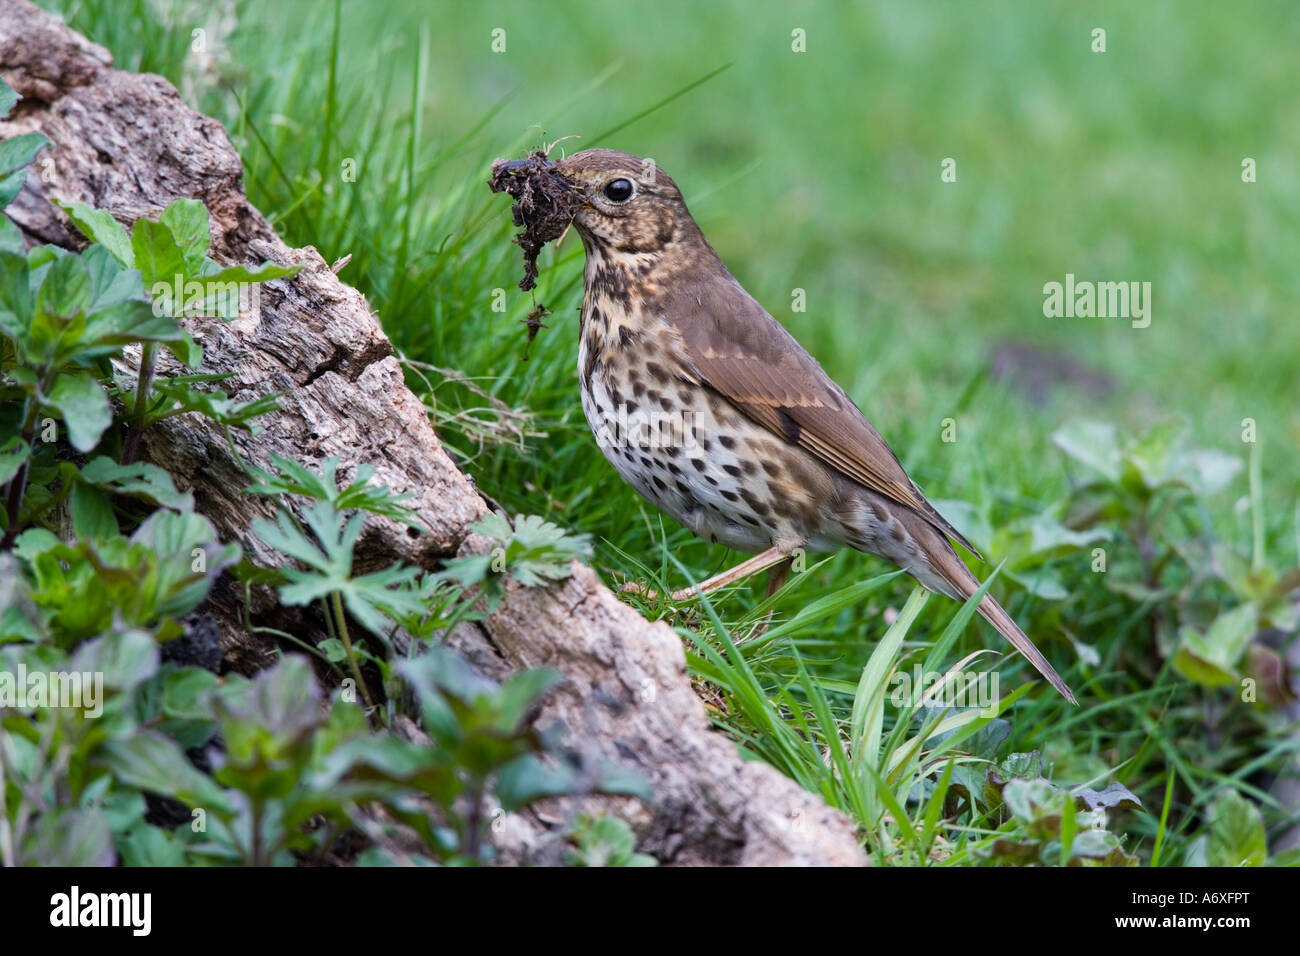 Song thrush Turdus philomelos standing on log with beak full of mud for nest building looking alert with nice defuse background Stock Photo